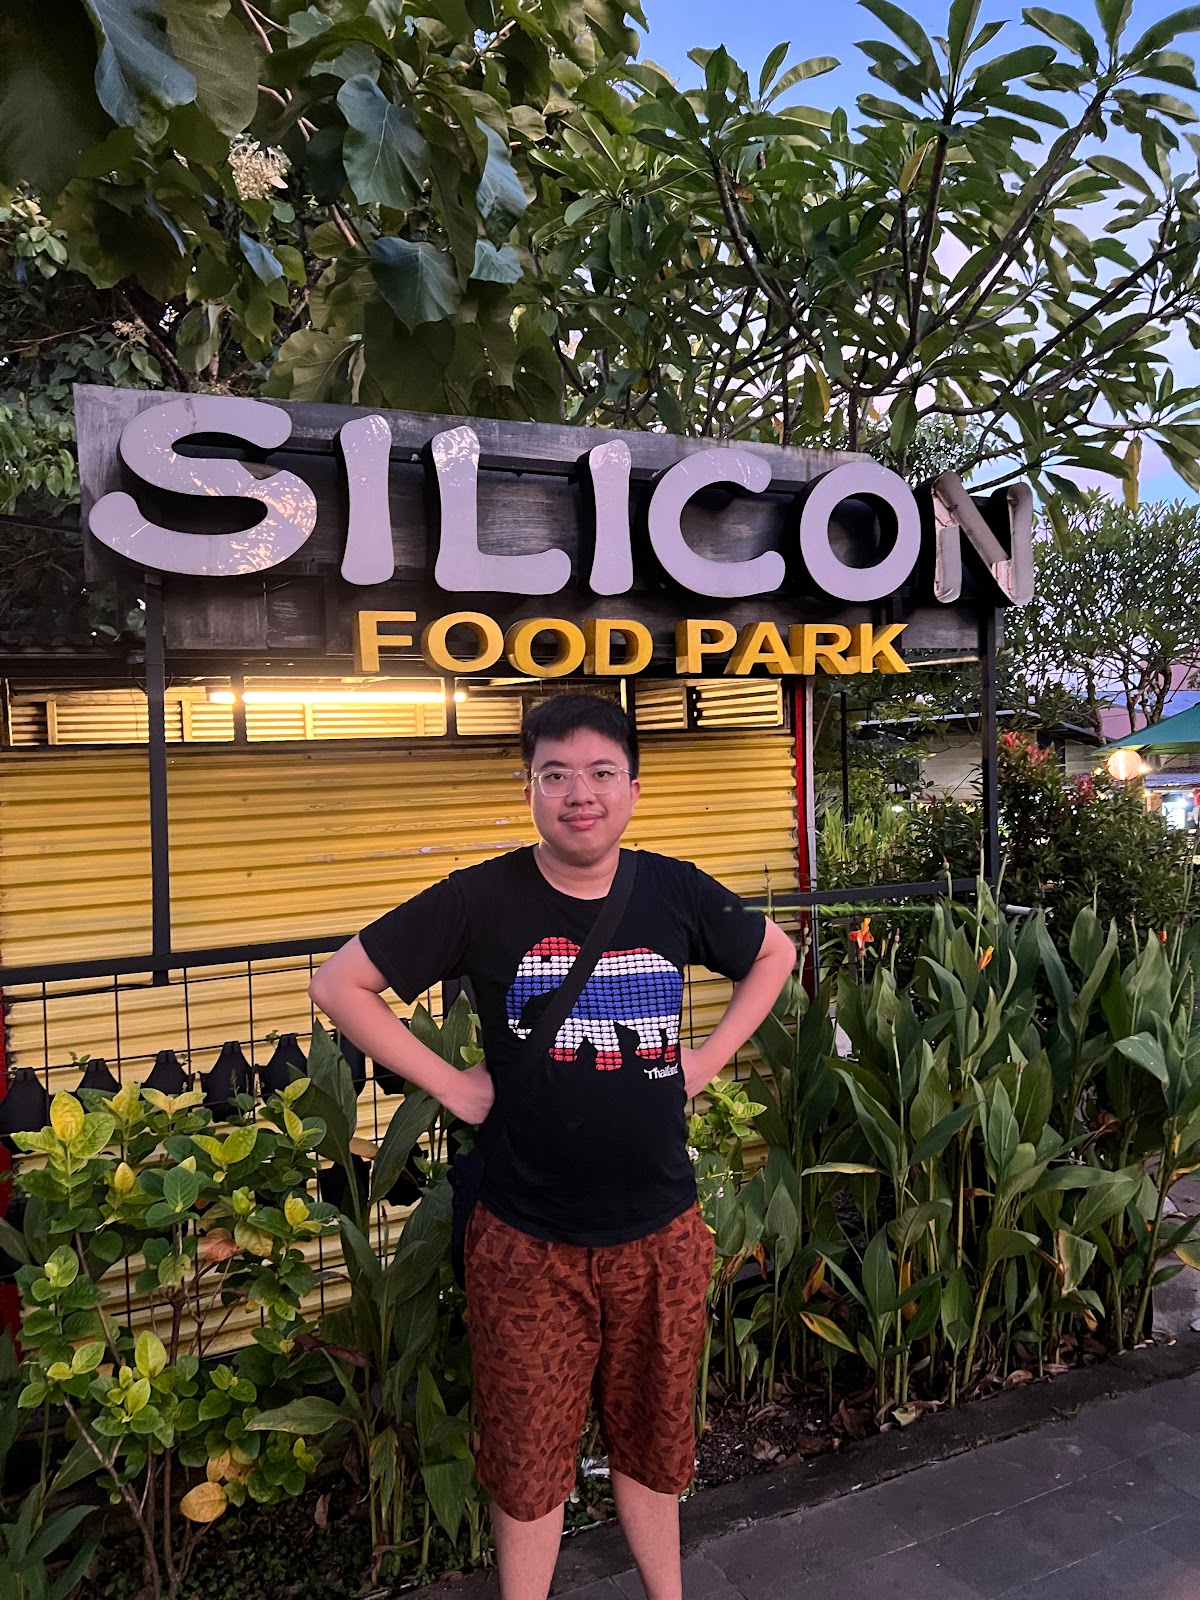 Cafe FOOD PARK SILICON 13773